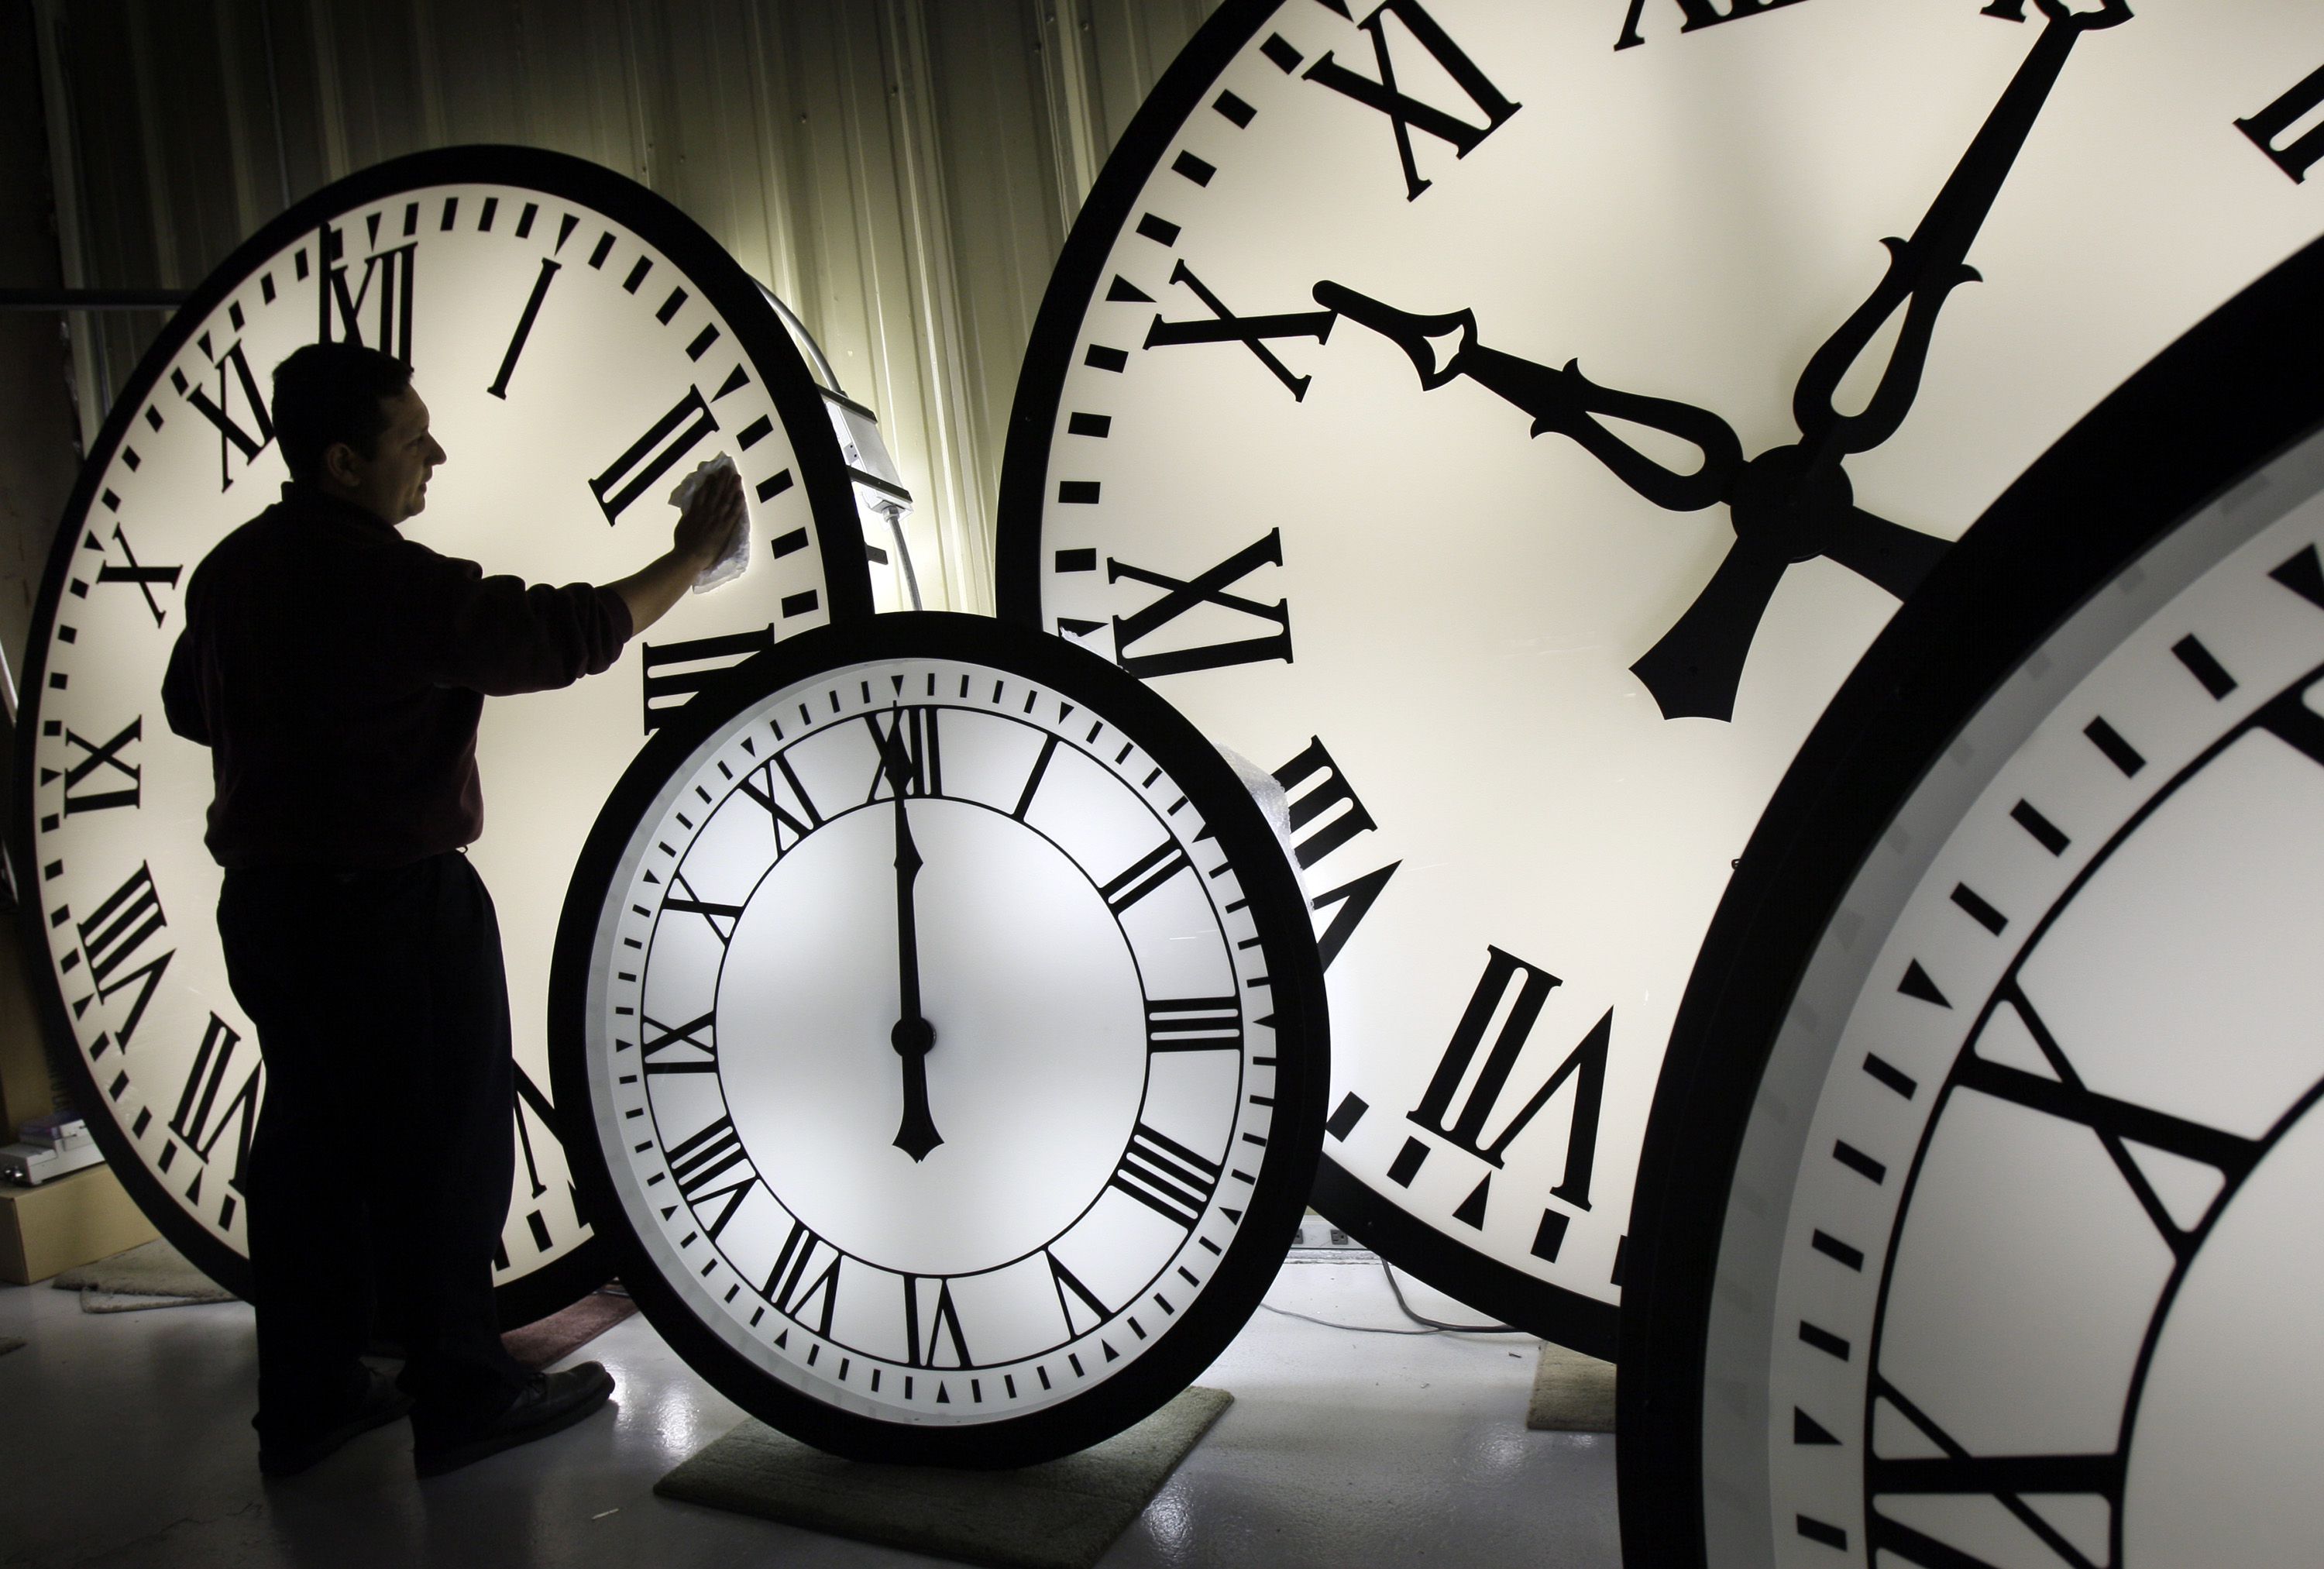 Why does the US have daylight saving time?